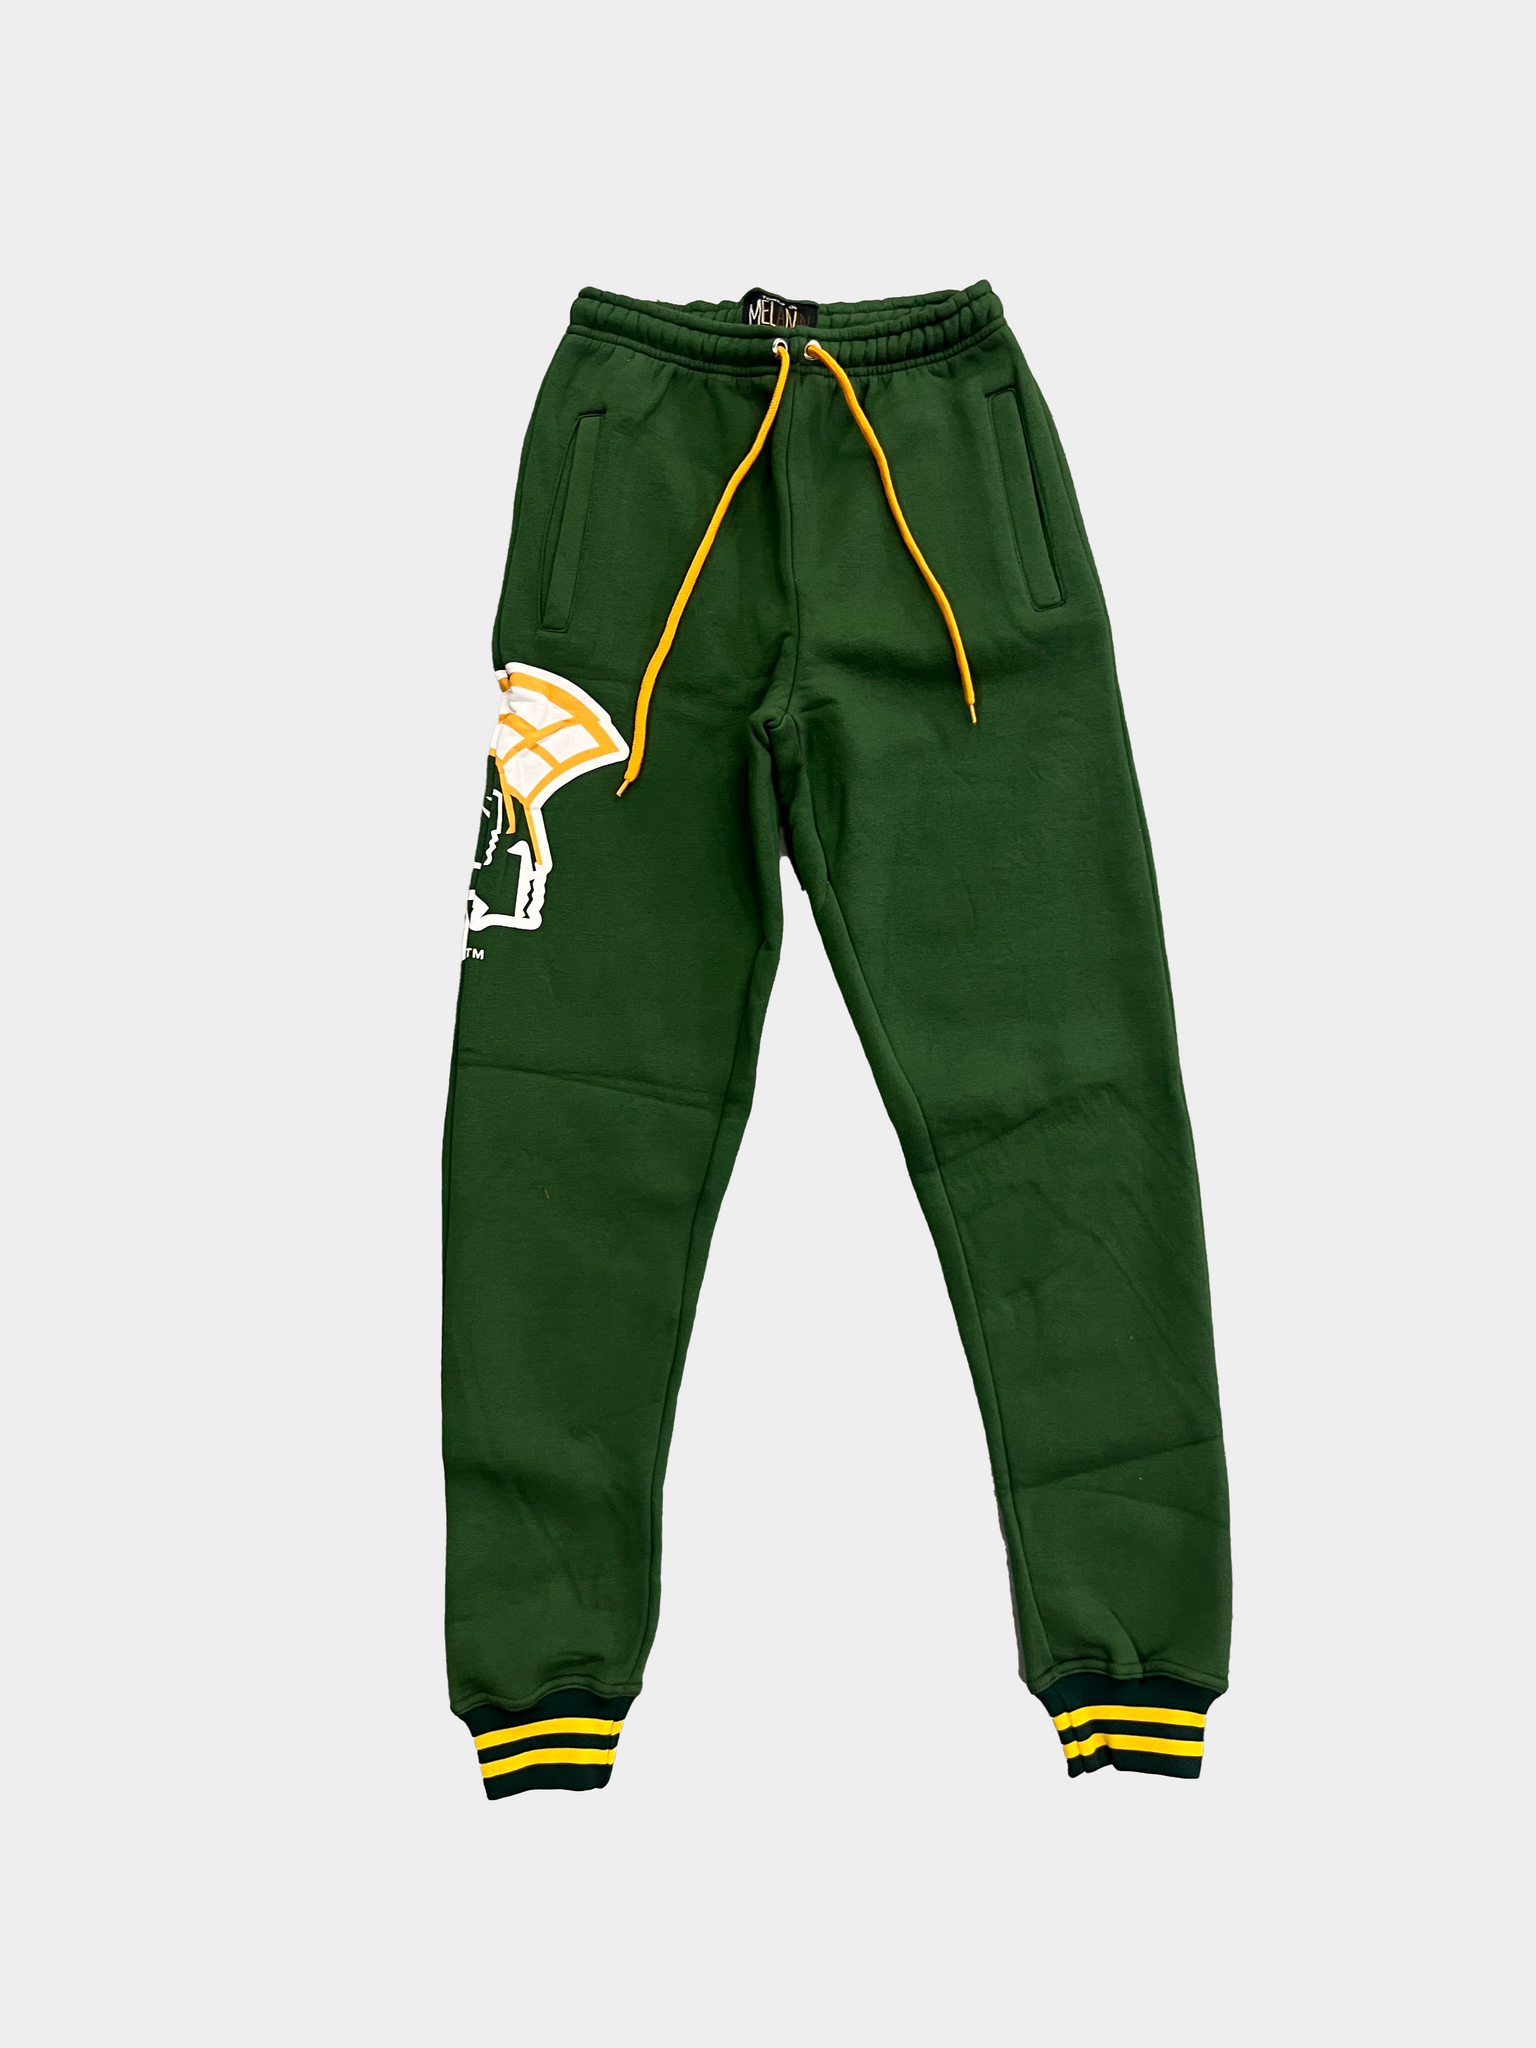 Norfolk State Fresh Set (Top and Bottom Now Sold Separately)